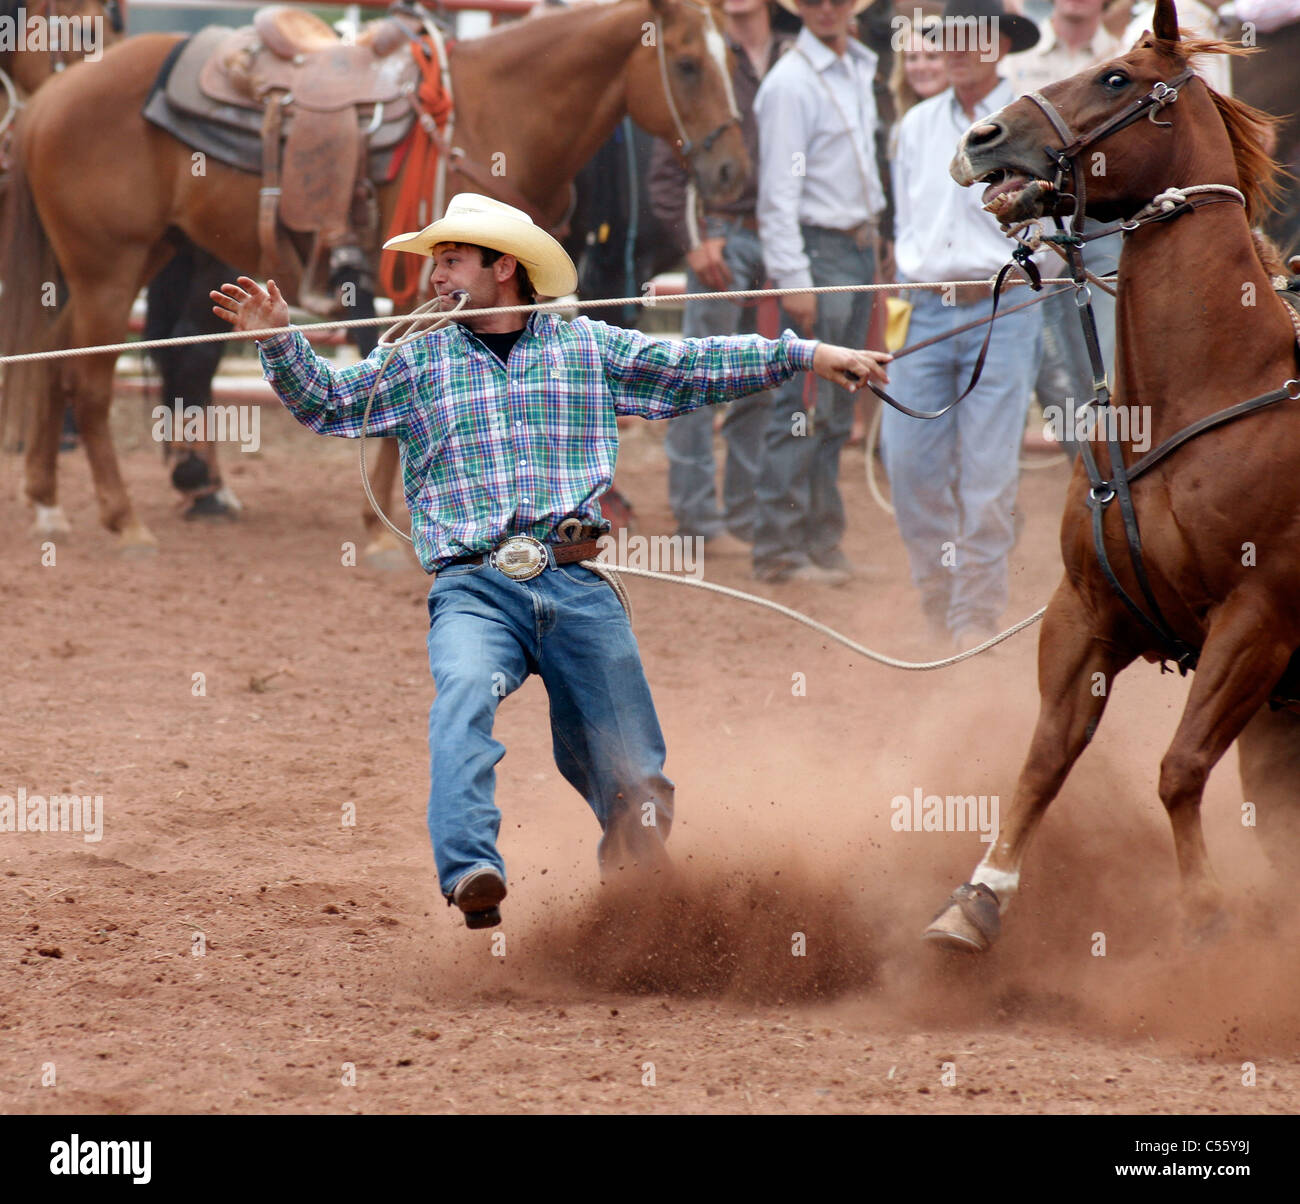 Competitor in the calf roping event at the Annual Indian Rodeo held in Mescalero, New Mexico. Stock Photo